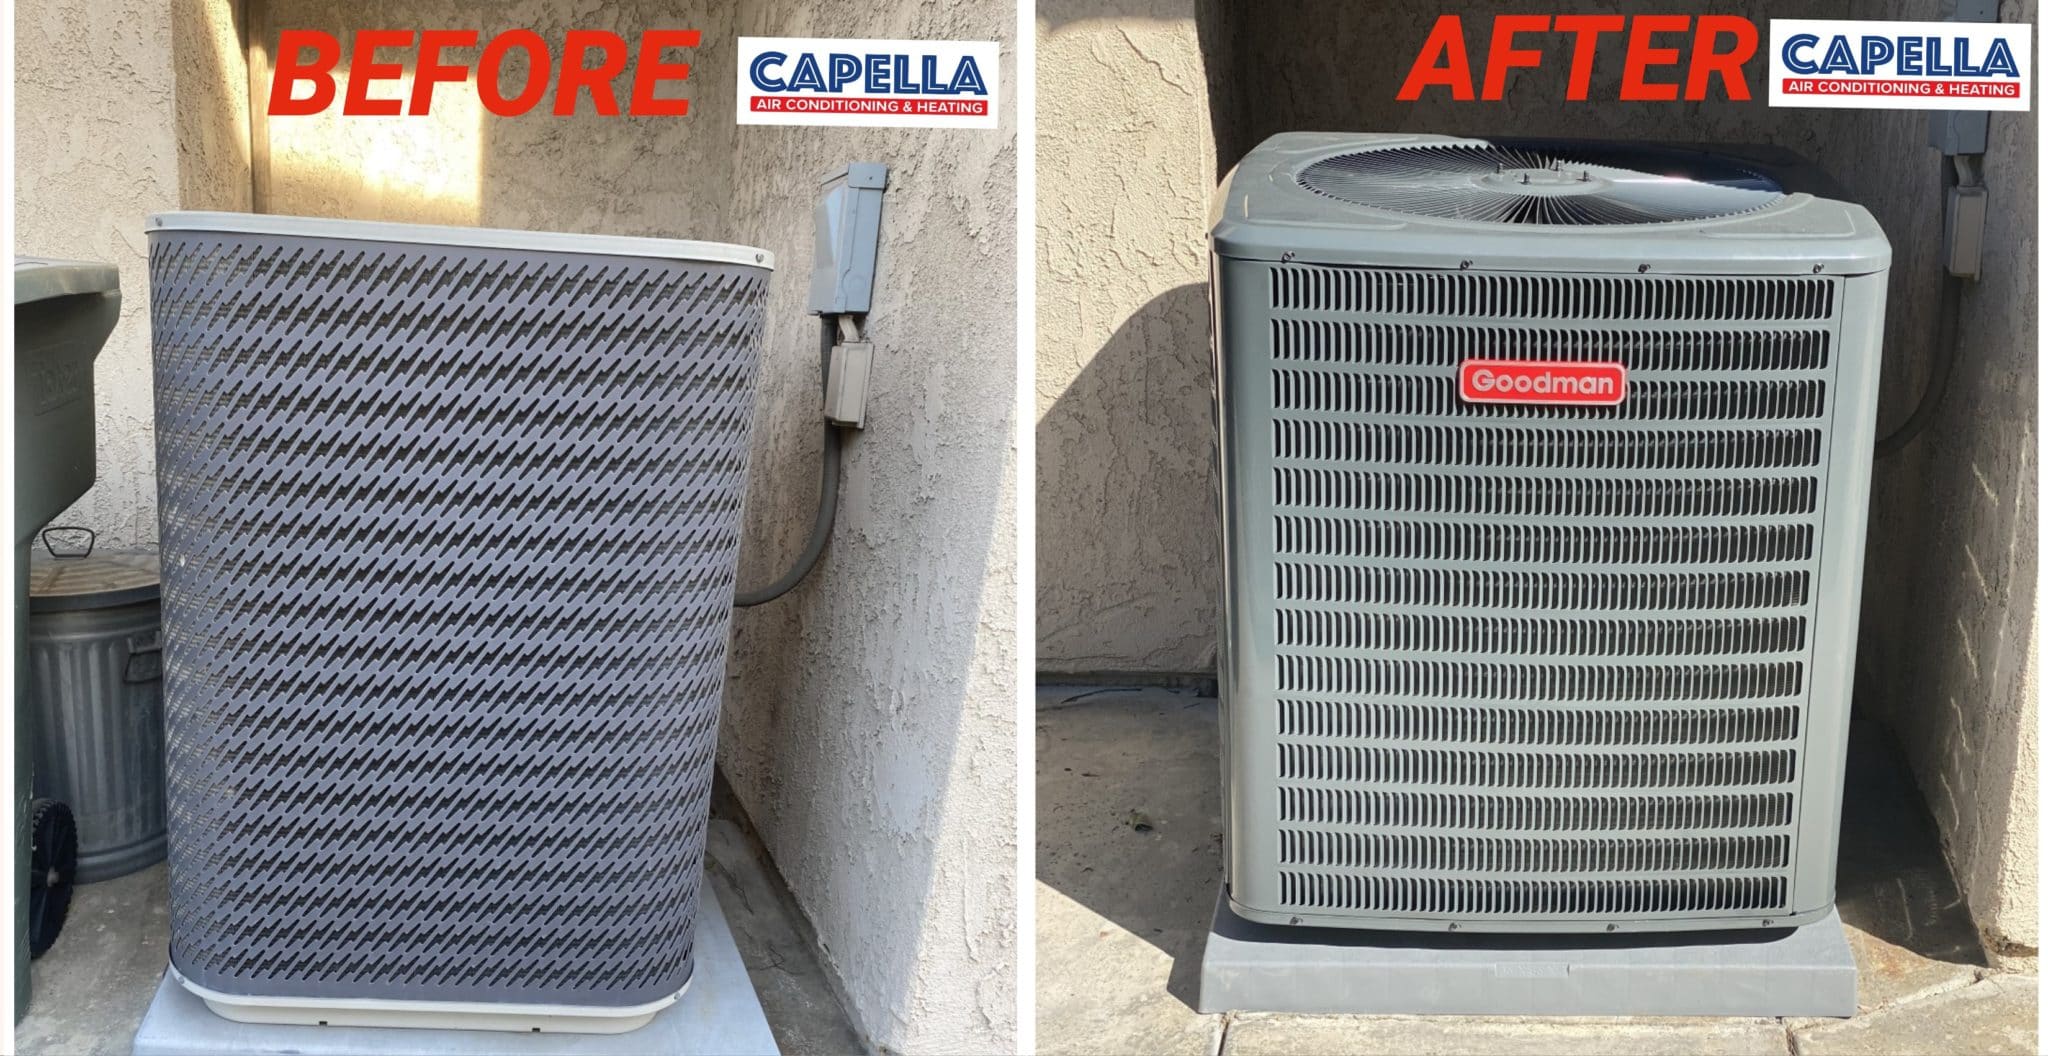 Capella Air Conditioning & Heating - Woodland Hills, CA, US, air conditioning